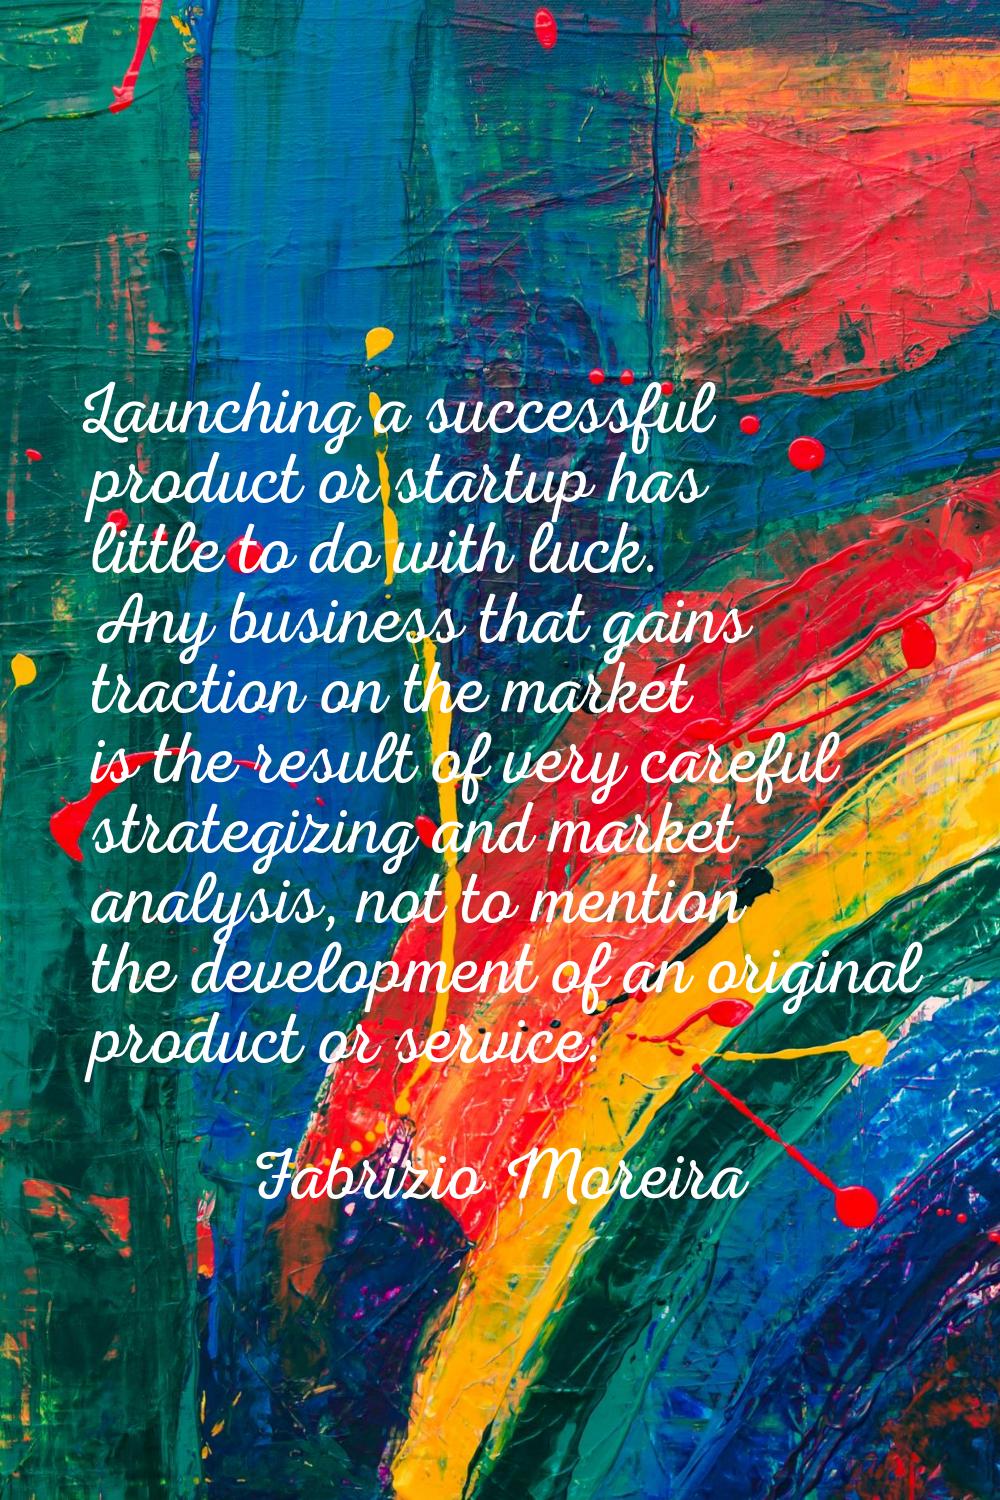 Launching a successful product or startup has little to do with luck. Any business that gains tract